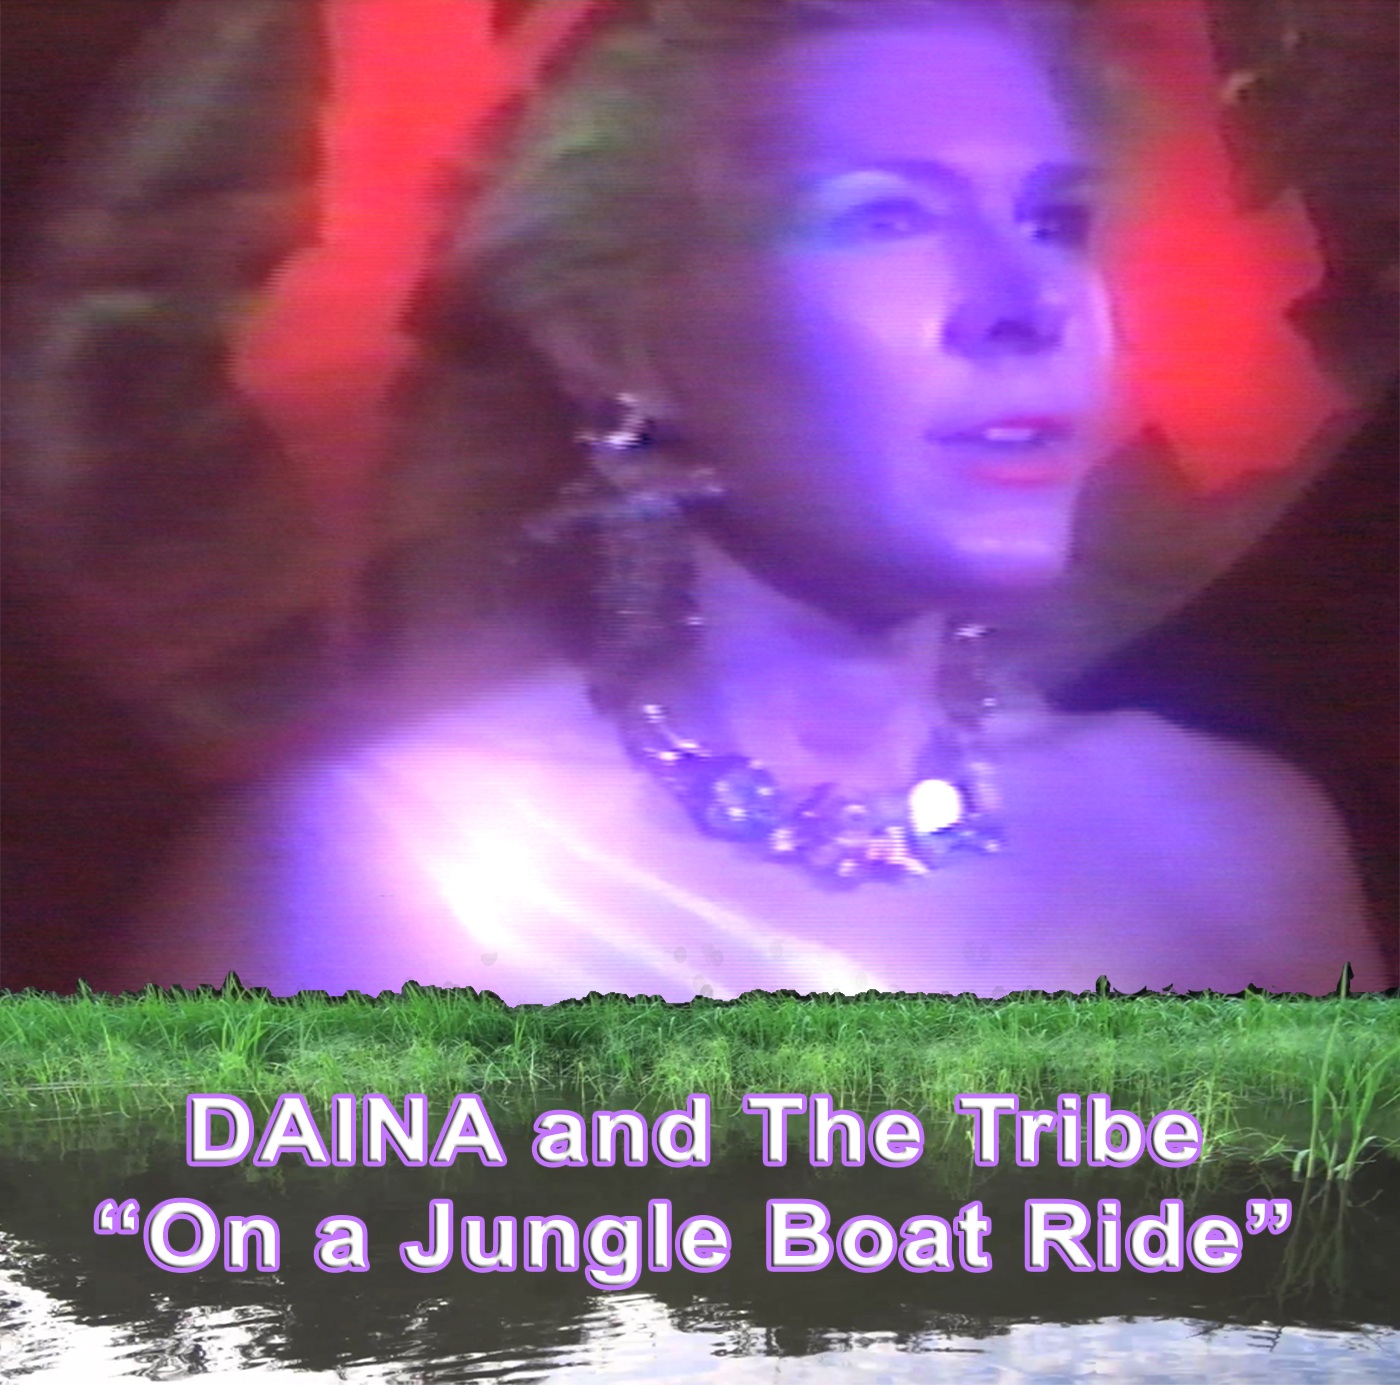 Daina and the Tribe "On a Jungle Boat Ride"